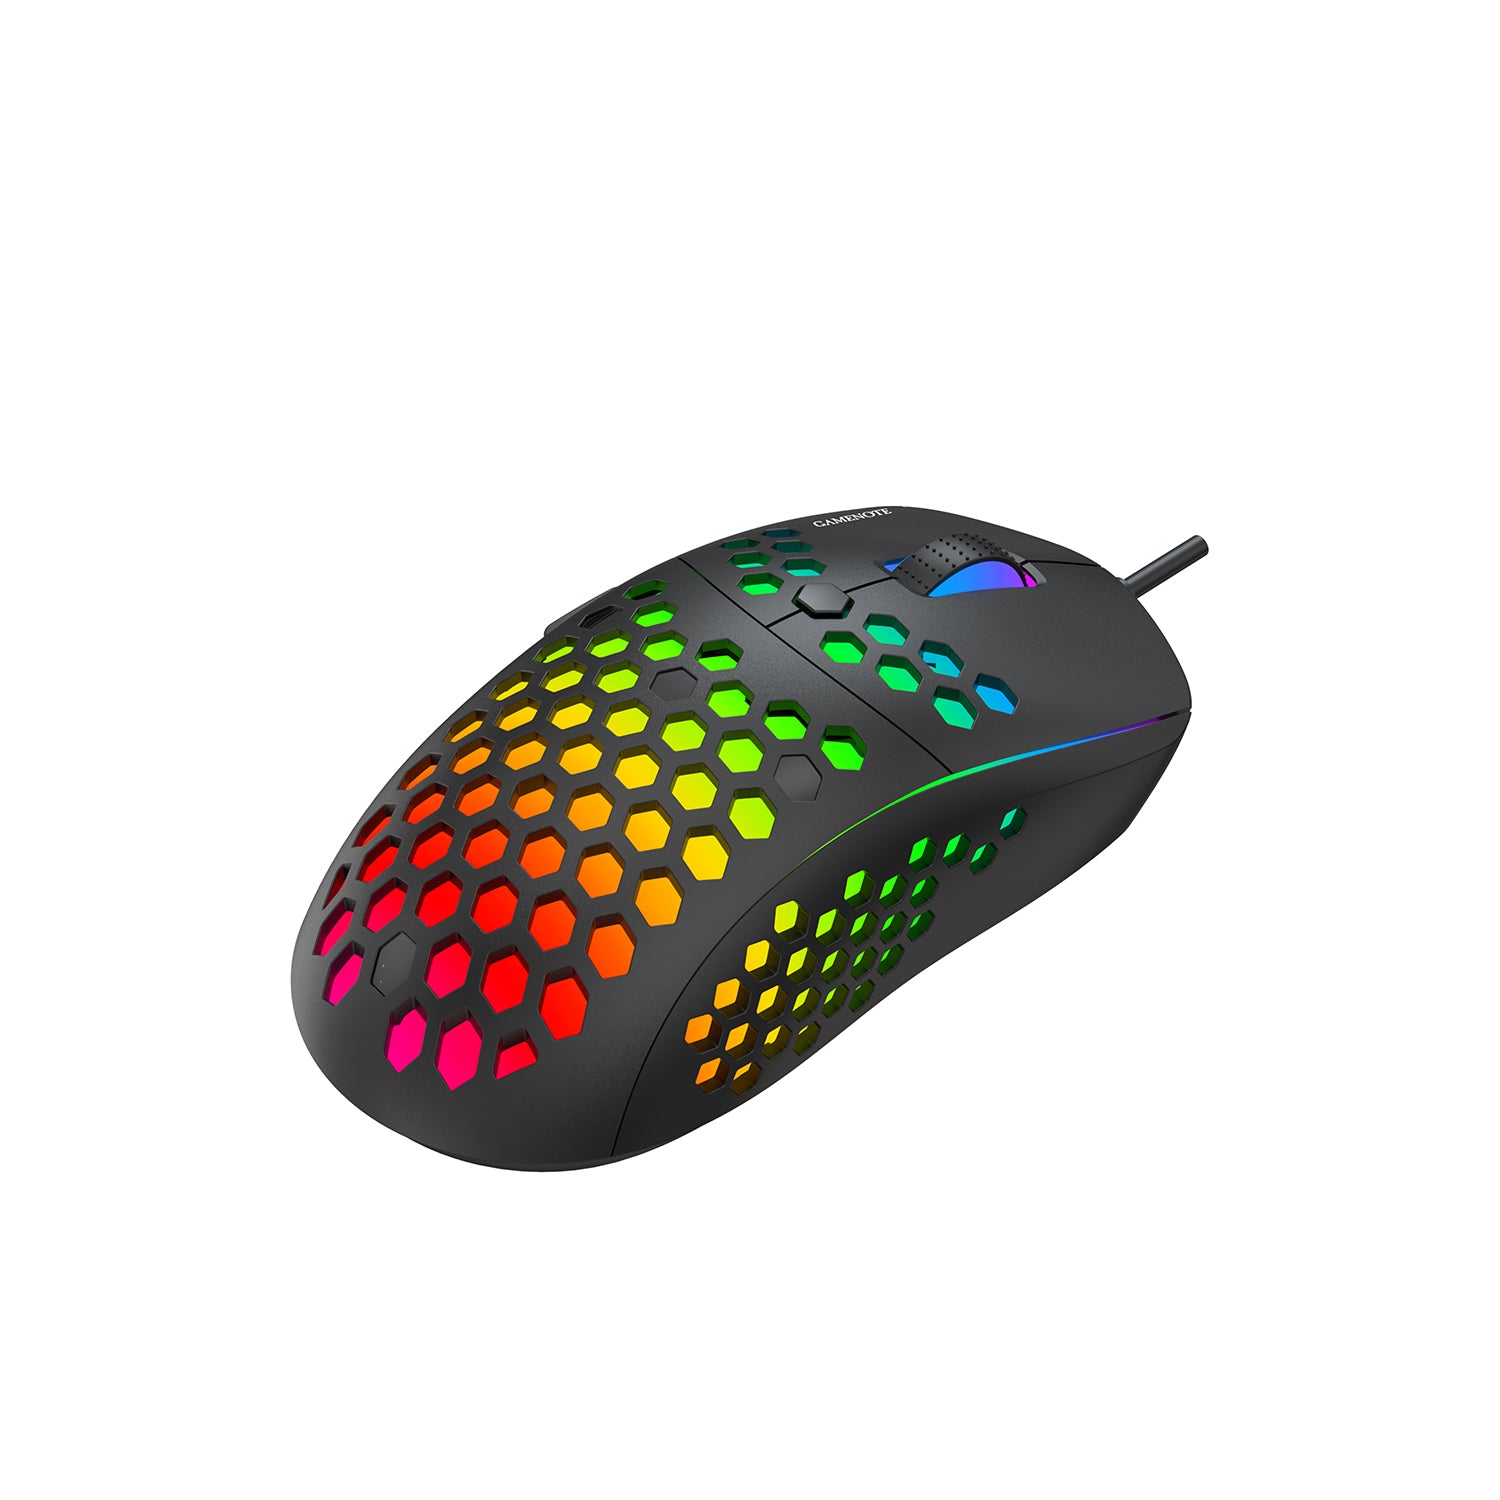 HAVIT MS878 RGB Backlit Programmable Gaming Mouse with Lightweight Honeycomb Shell